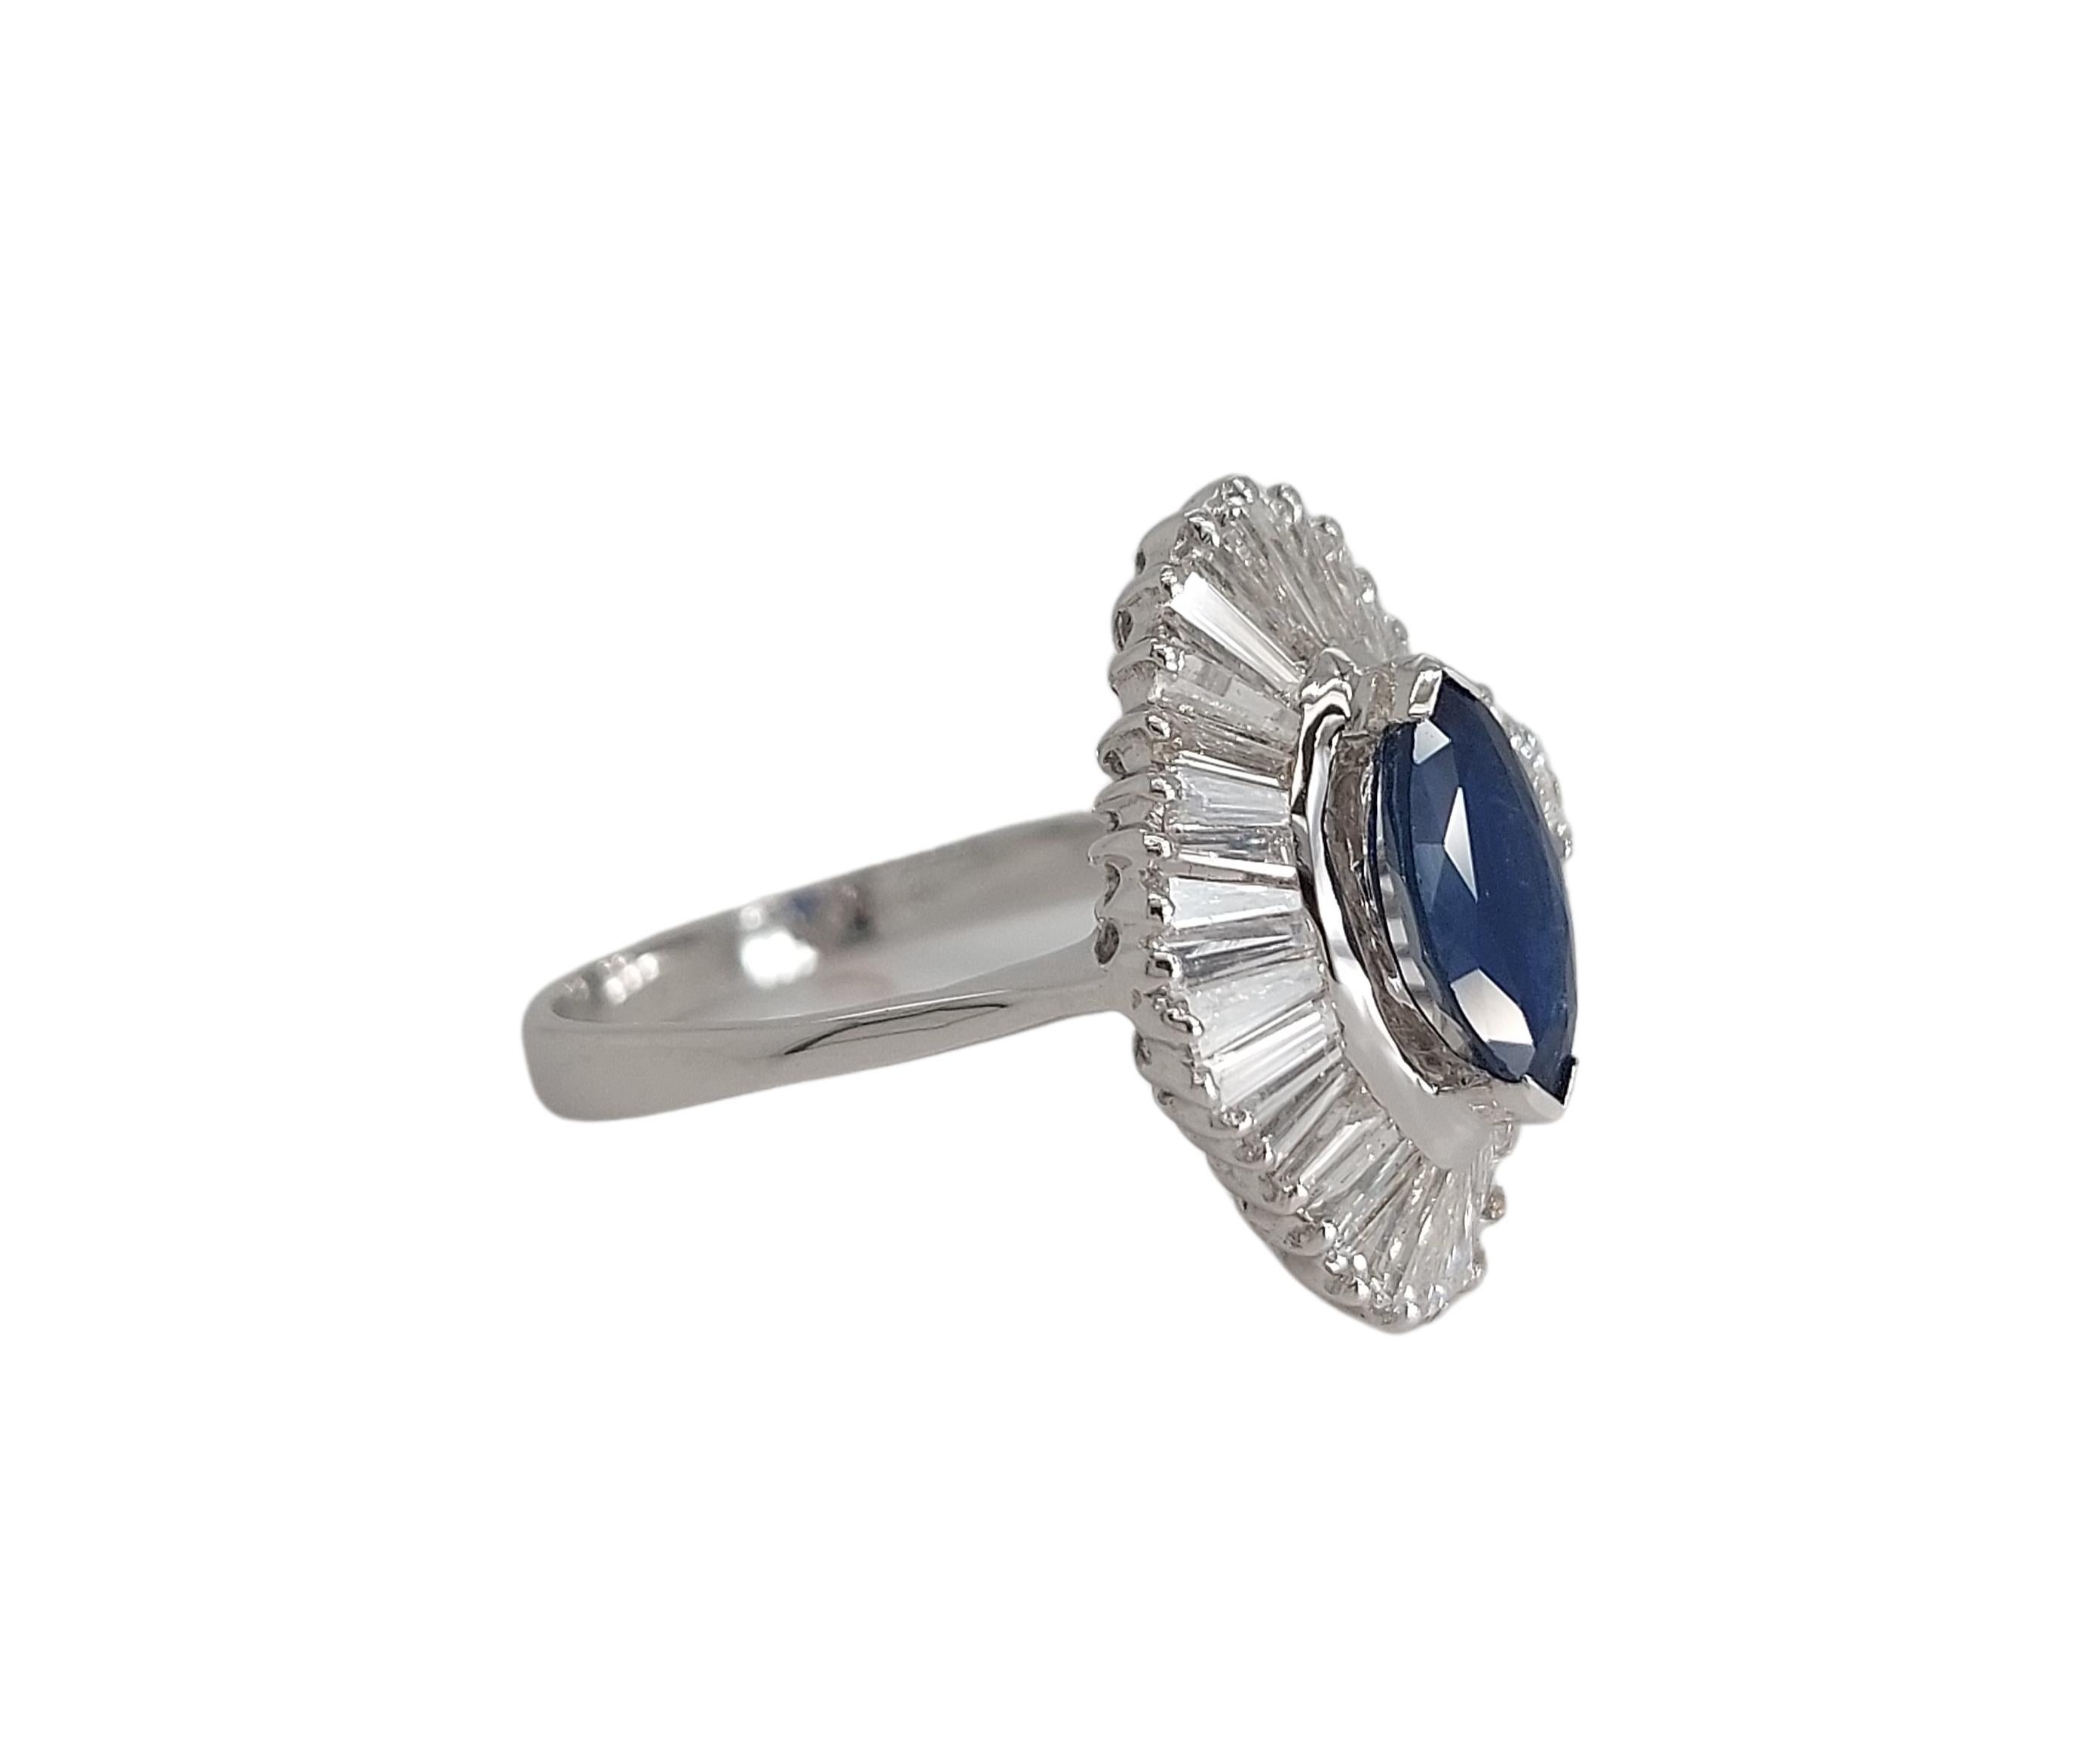 18kt White Gold Ring with 1.02ct Marquise Cut Sapphire and 2.4ct Diamonds For Sale 2